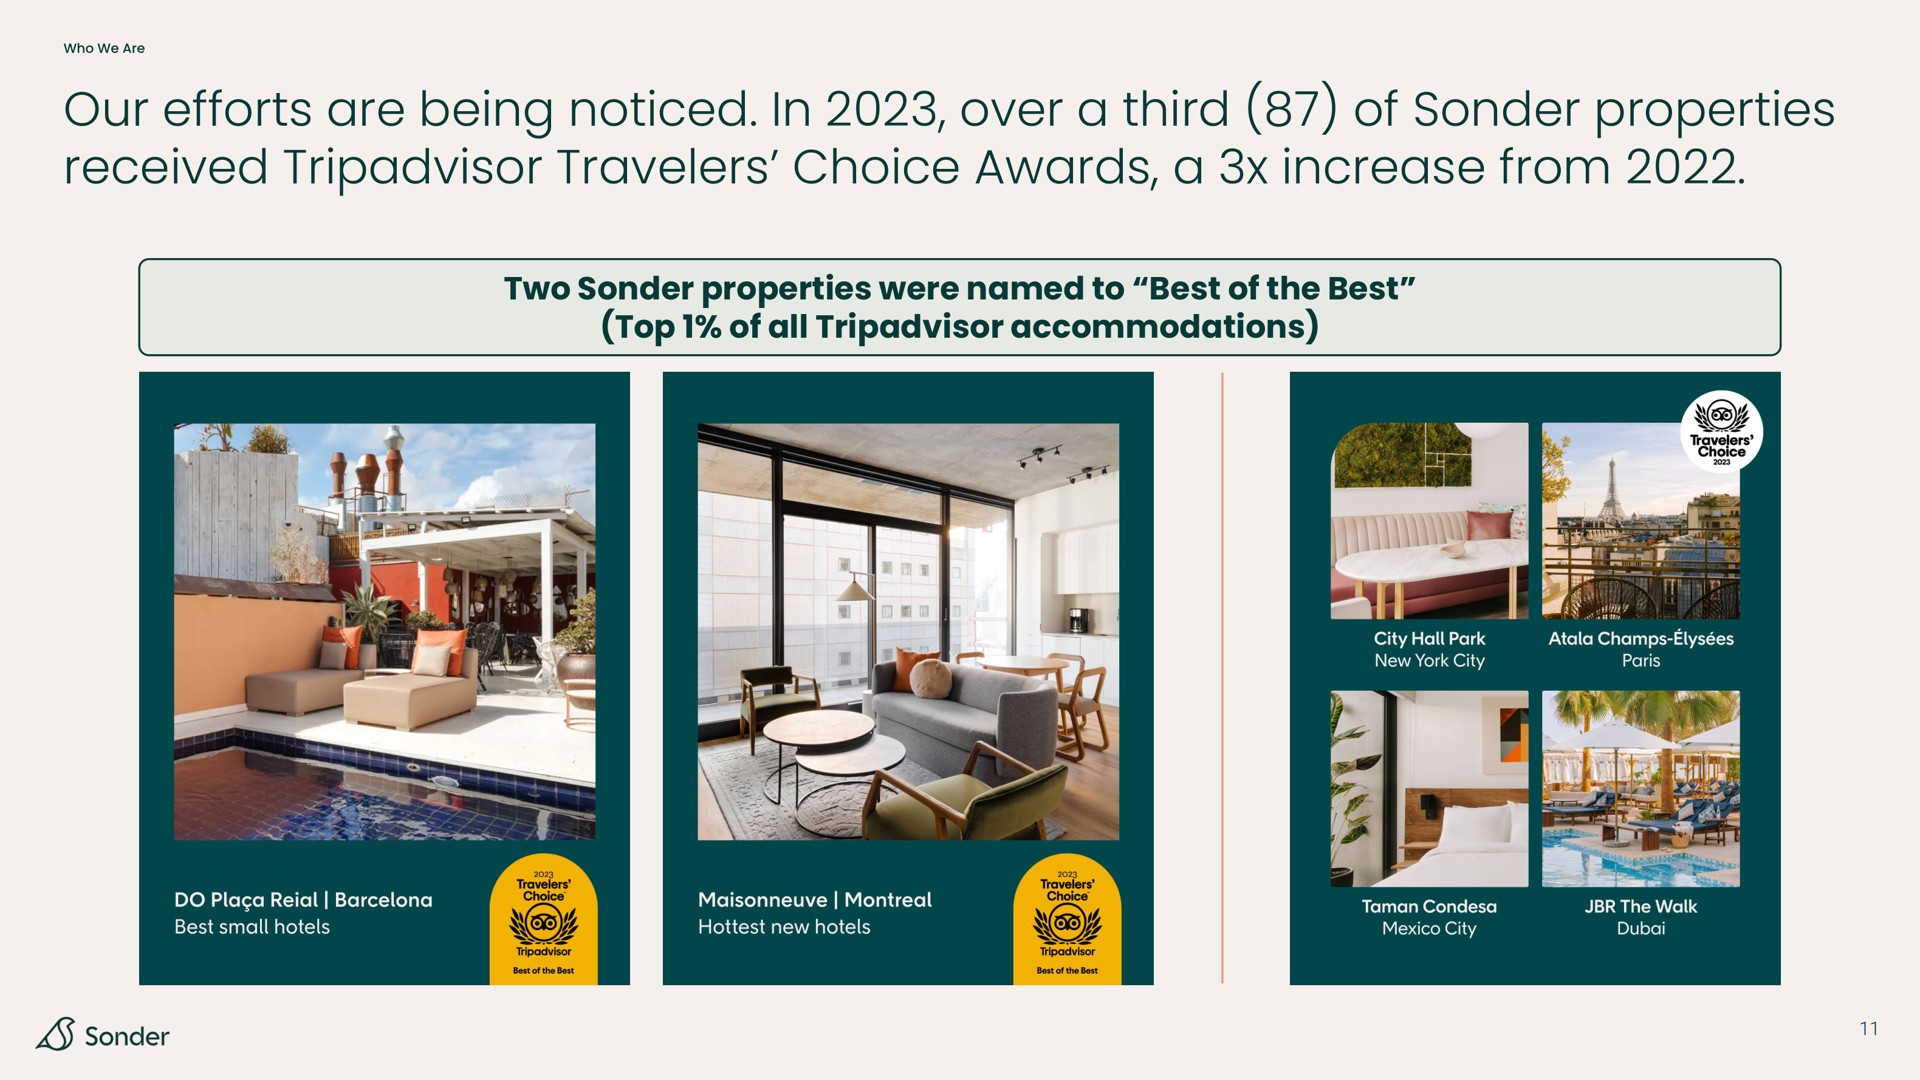 our efforts are being noticed in over a third of properties received travelers choice awards a increase from two properties were named to best of the best top of all accommodations | Sonder